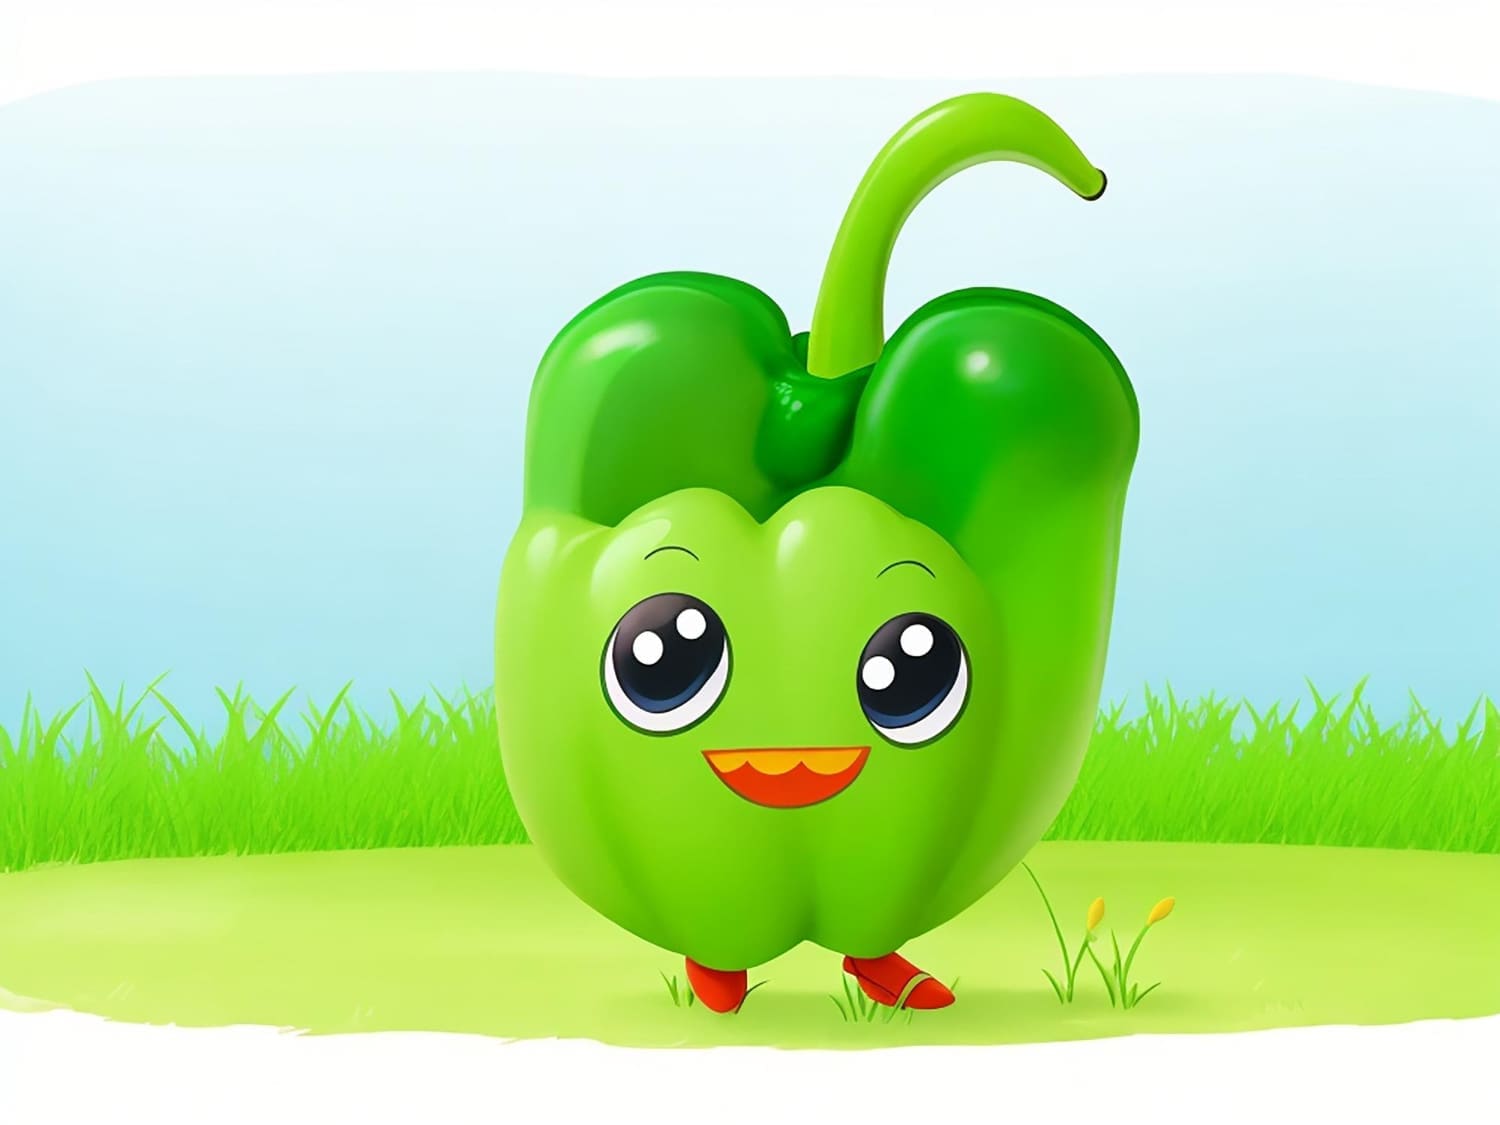 Cartoon graphic of two happy green apples dancing.